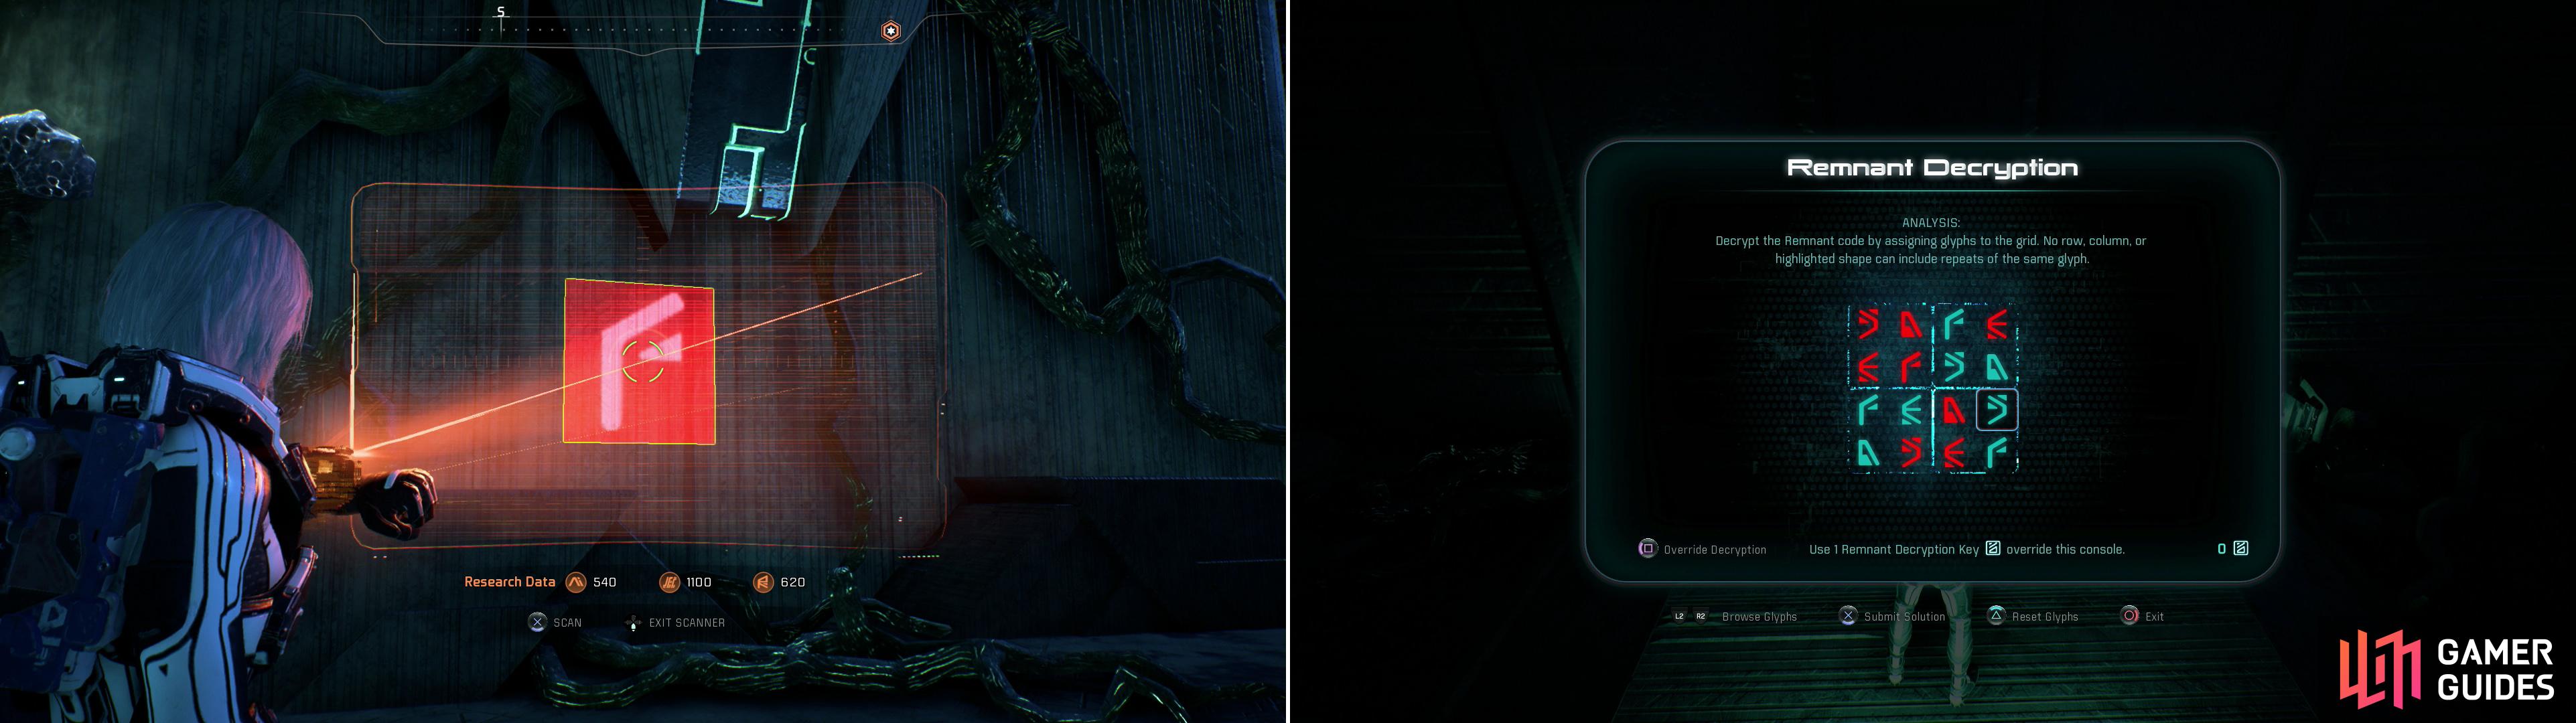 In an optional area youll find some glyphs you can scan (left) which will help you solve a Remnant puzzle (right) and open a lucrative container.